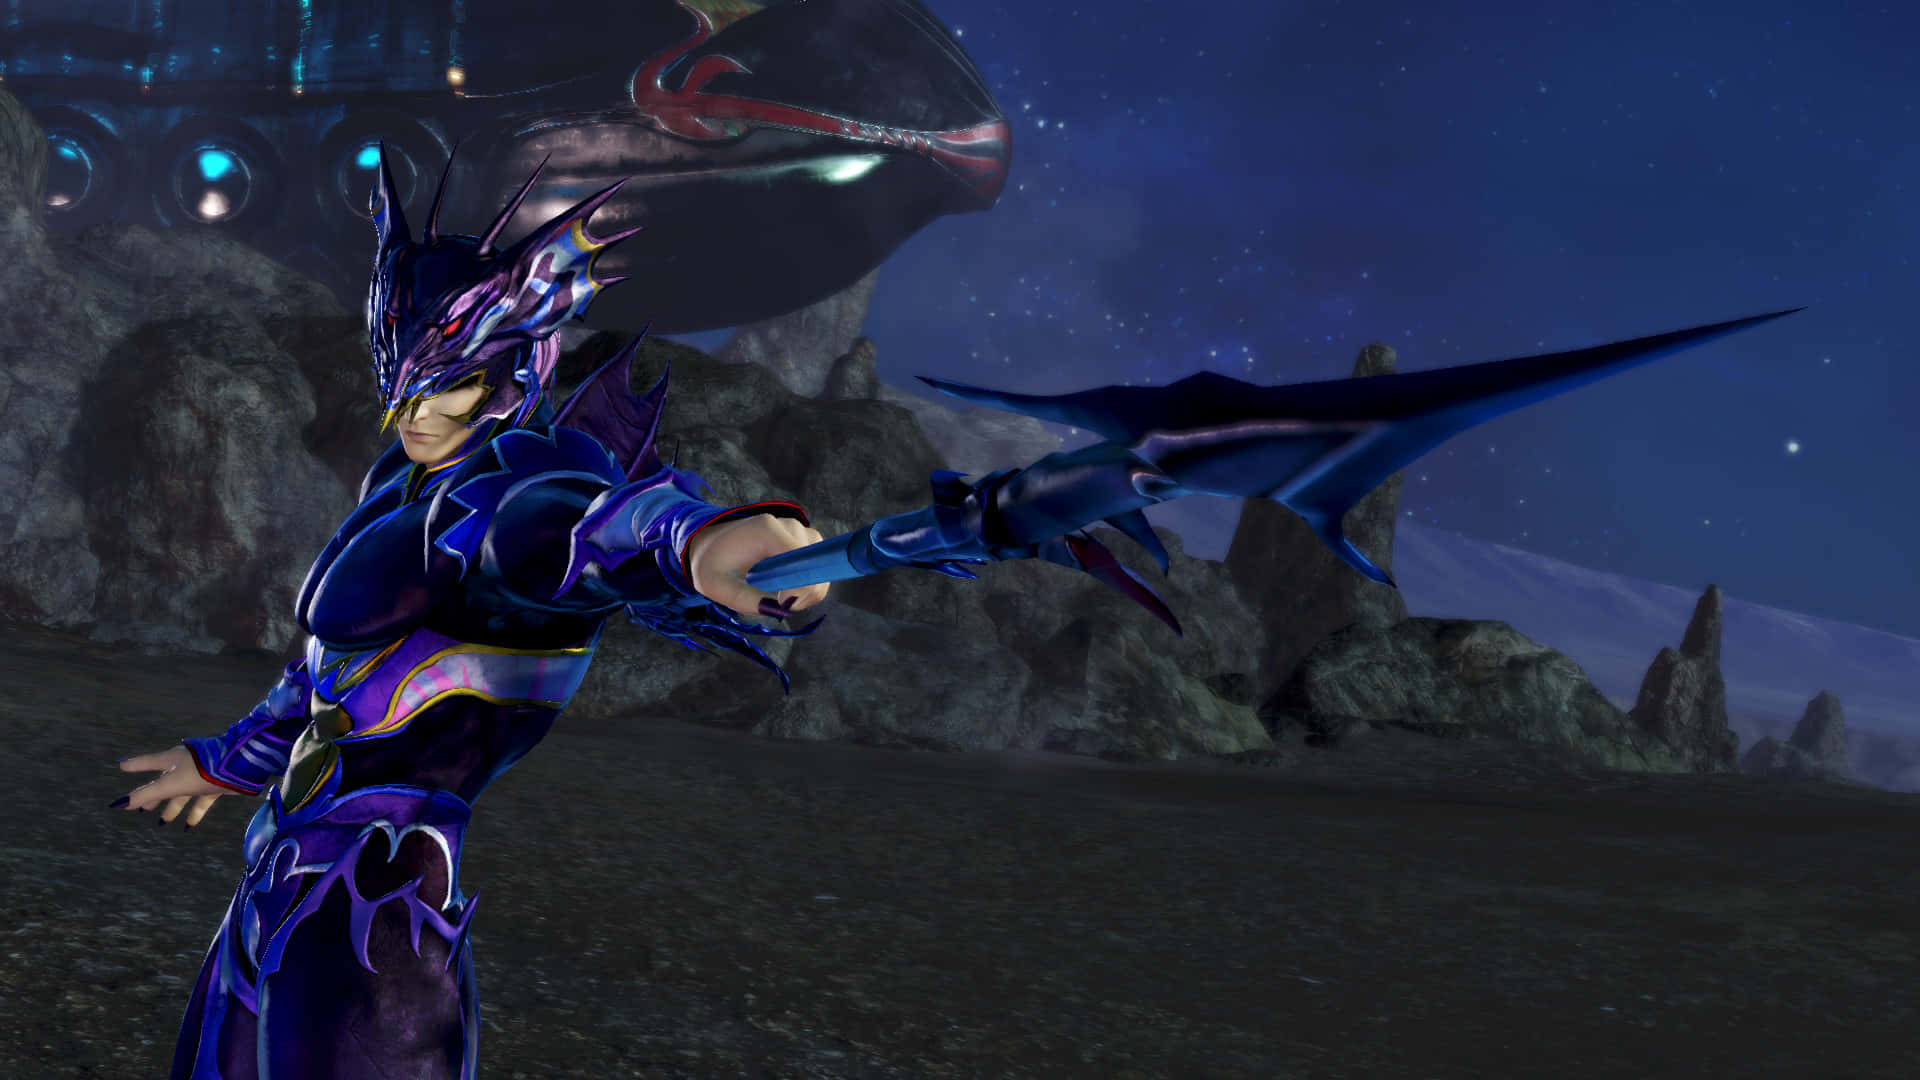 The Dragoon Knight, Kain Highwind In Action Wallpaper